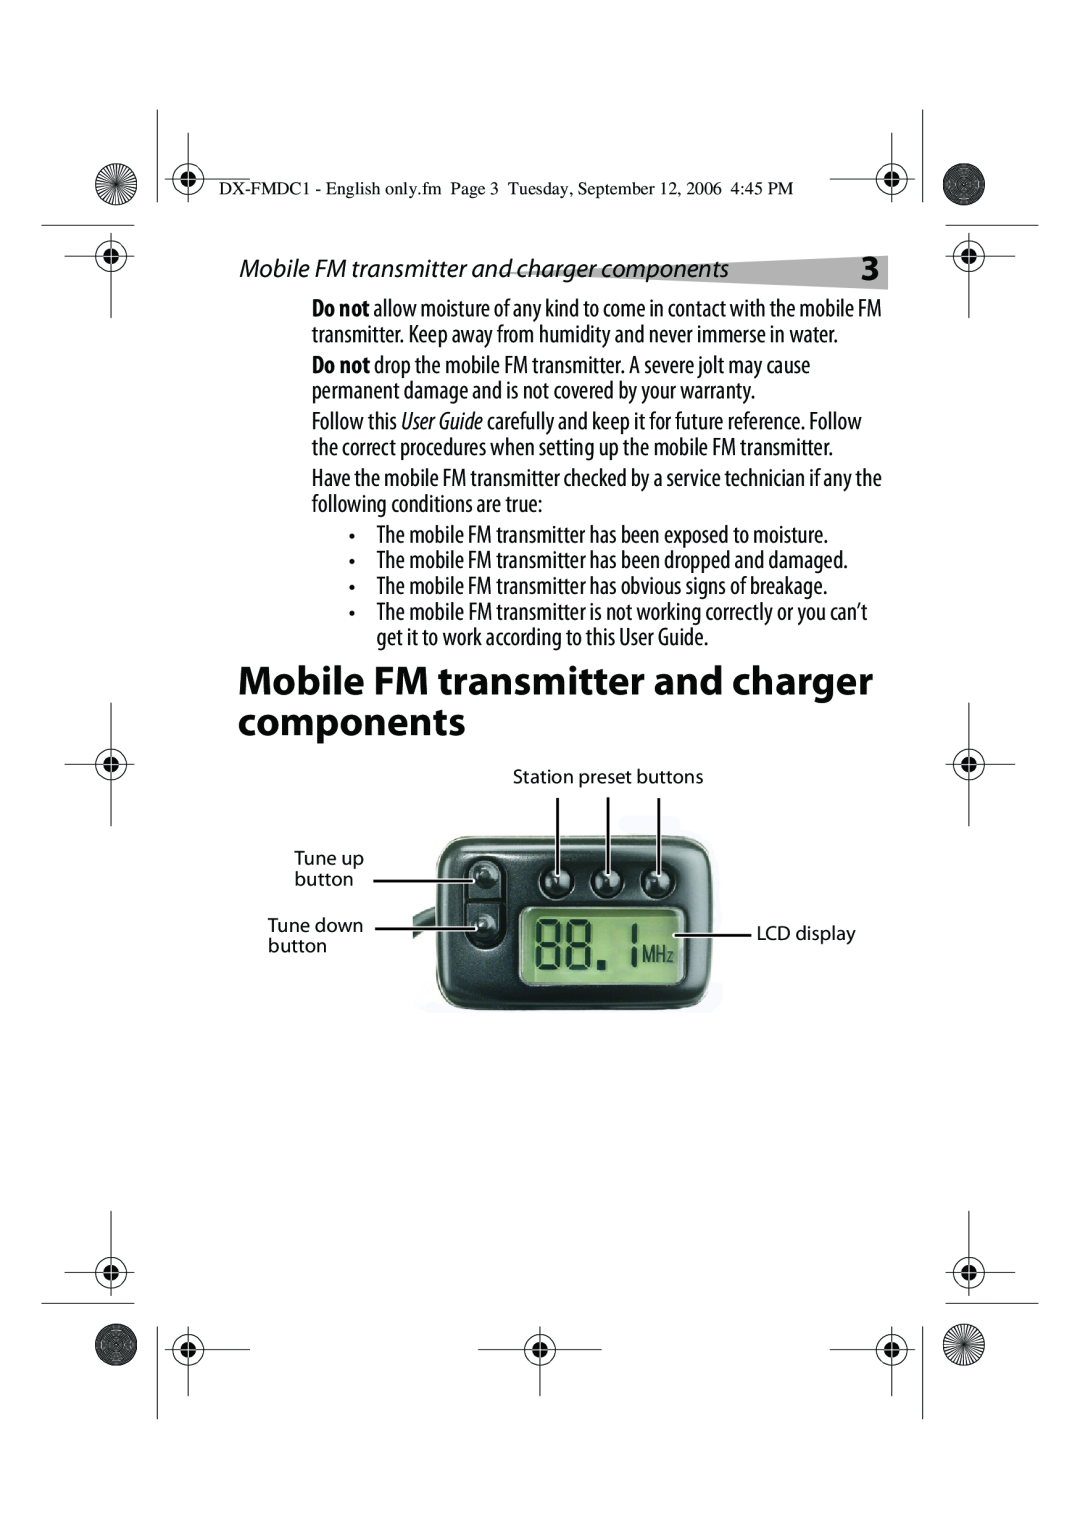 Dynex DX-FMDC1 manual Mobile FM transmitter and charger components 